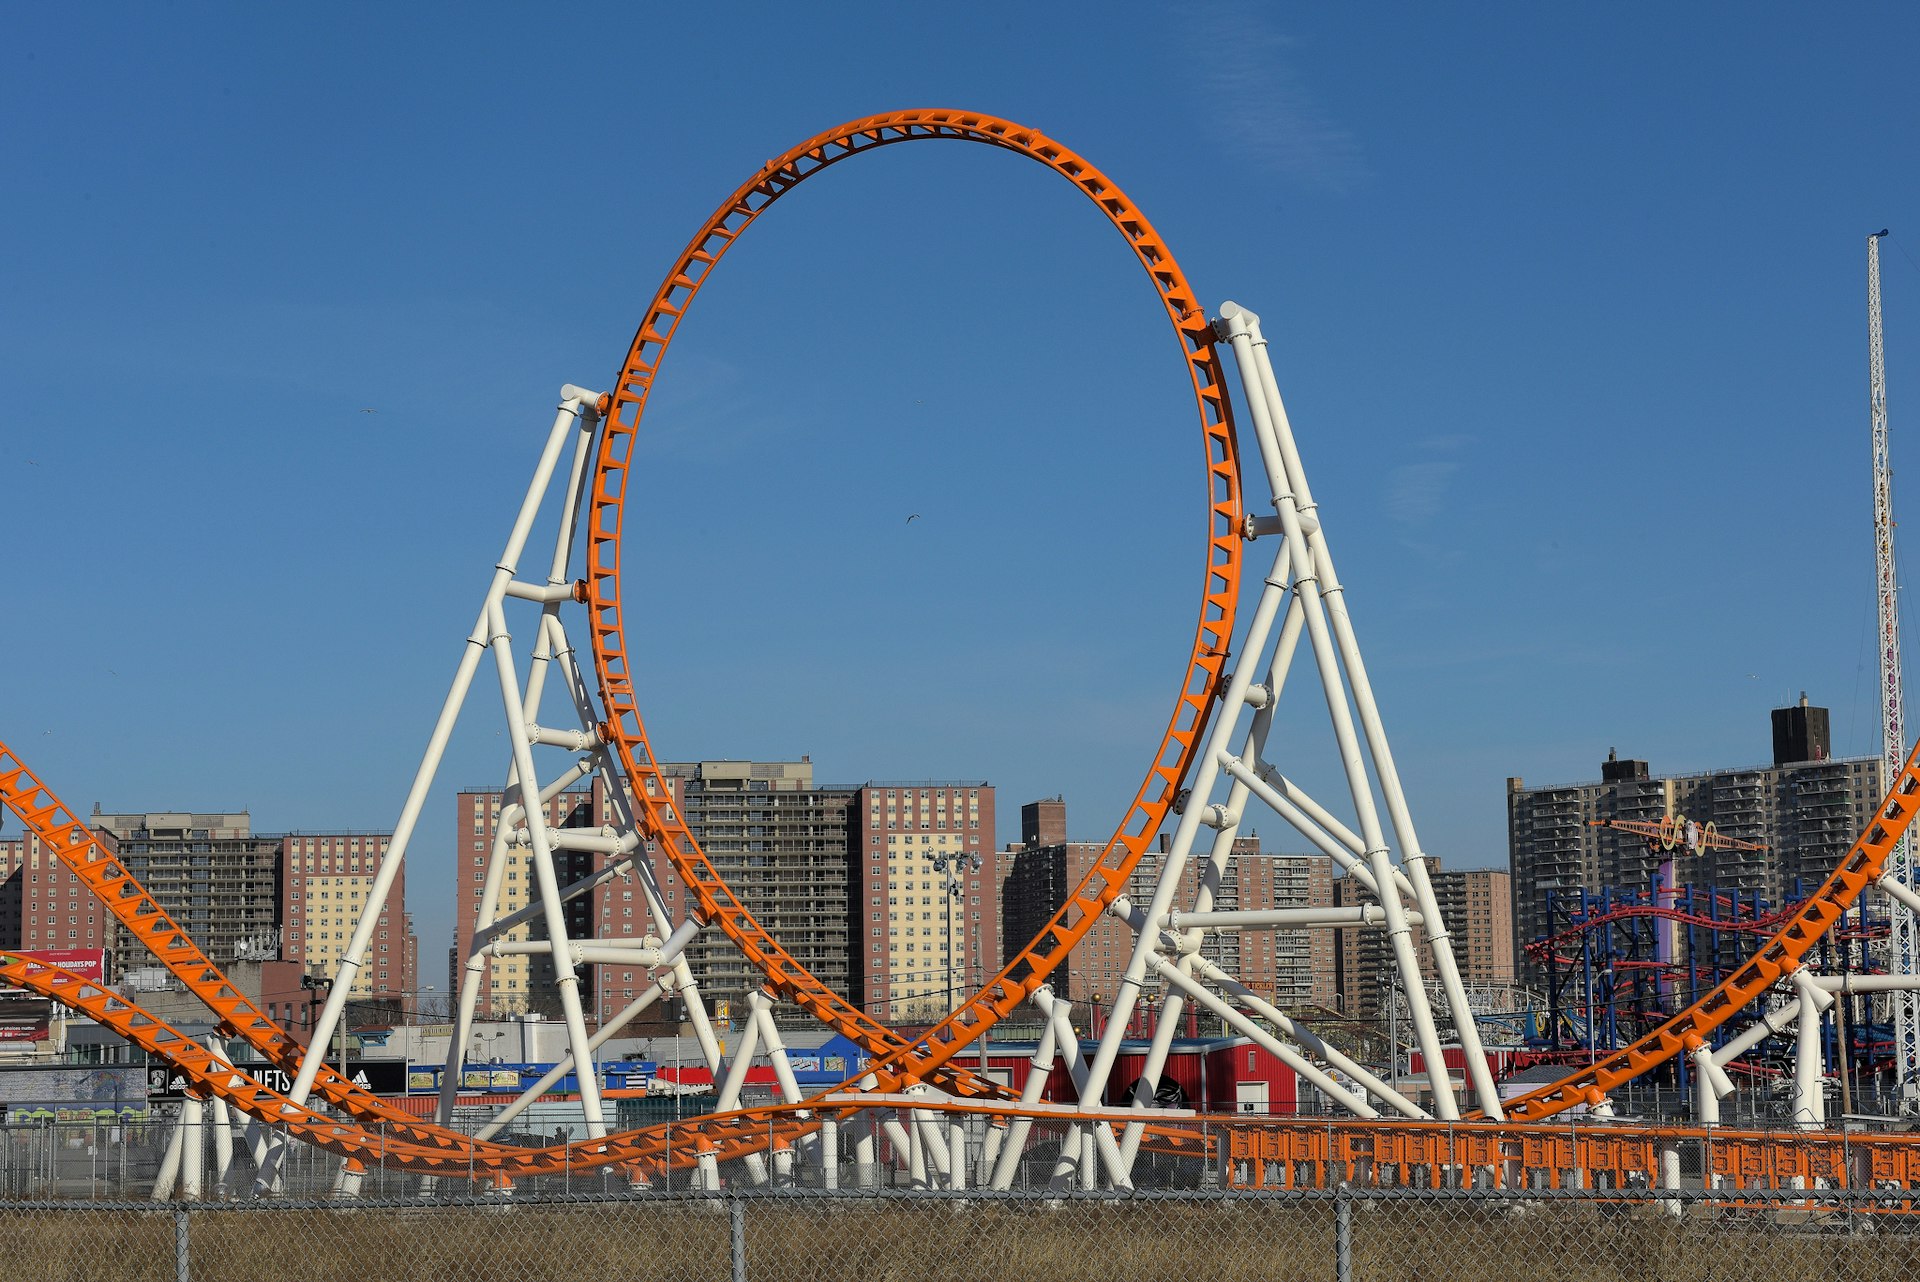 The new Thunderbolt brings the first vertical loop to Coney Island since 1910. Image by Steven Pisano / CC BY 2.0